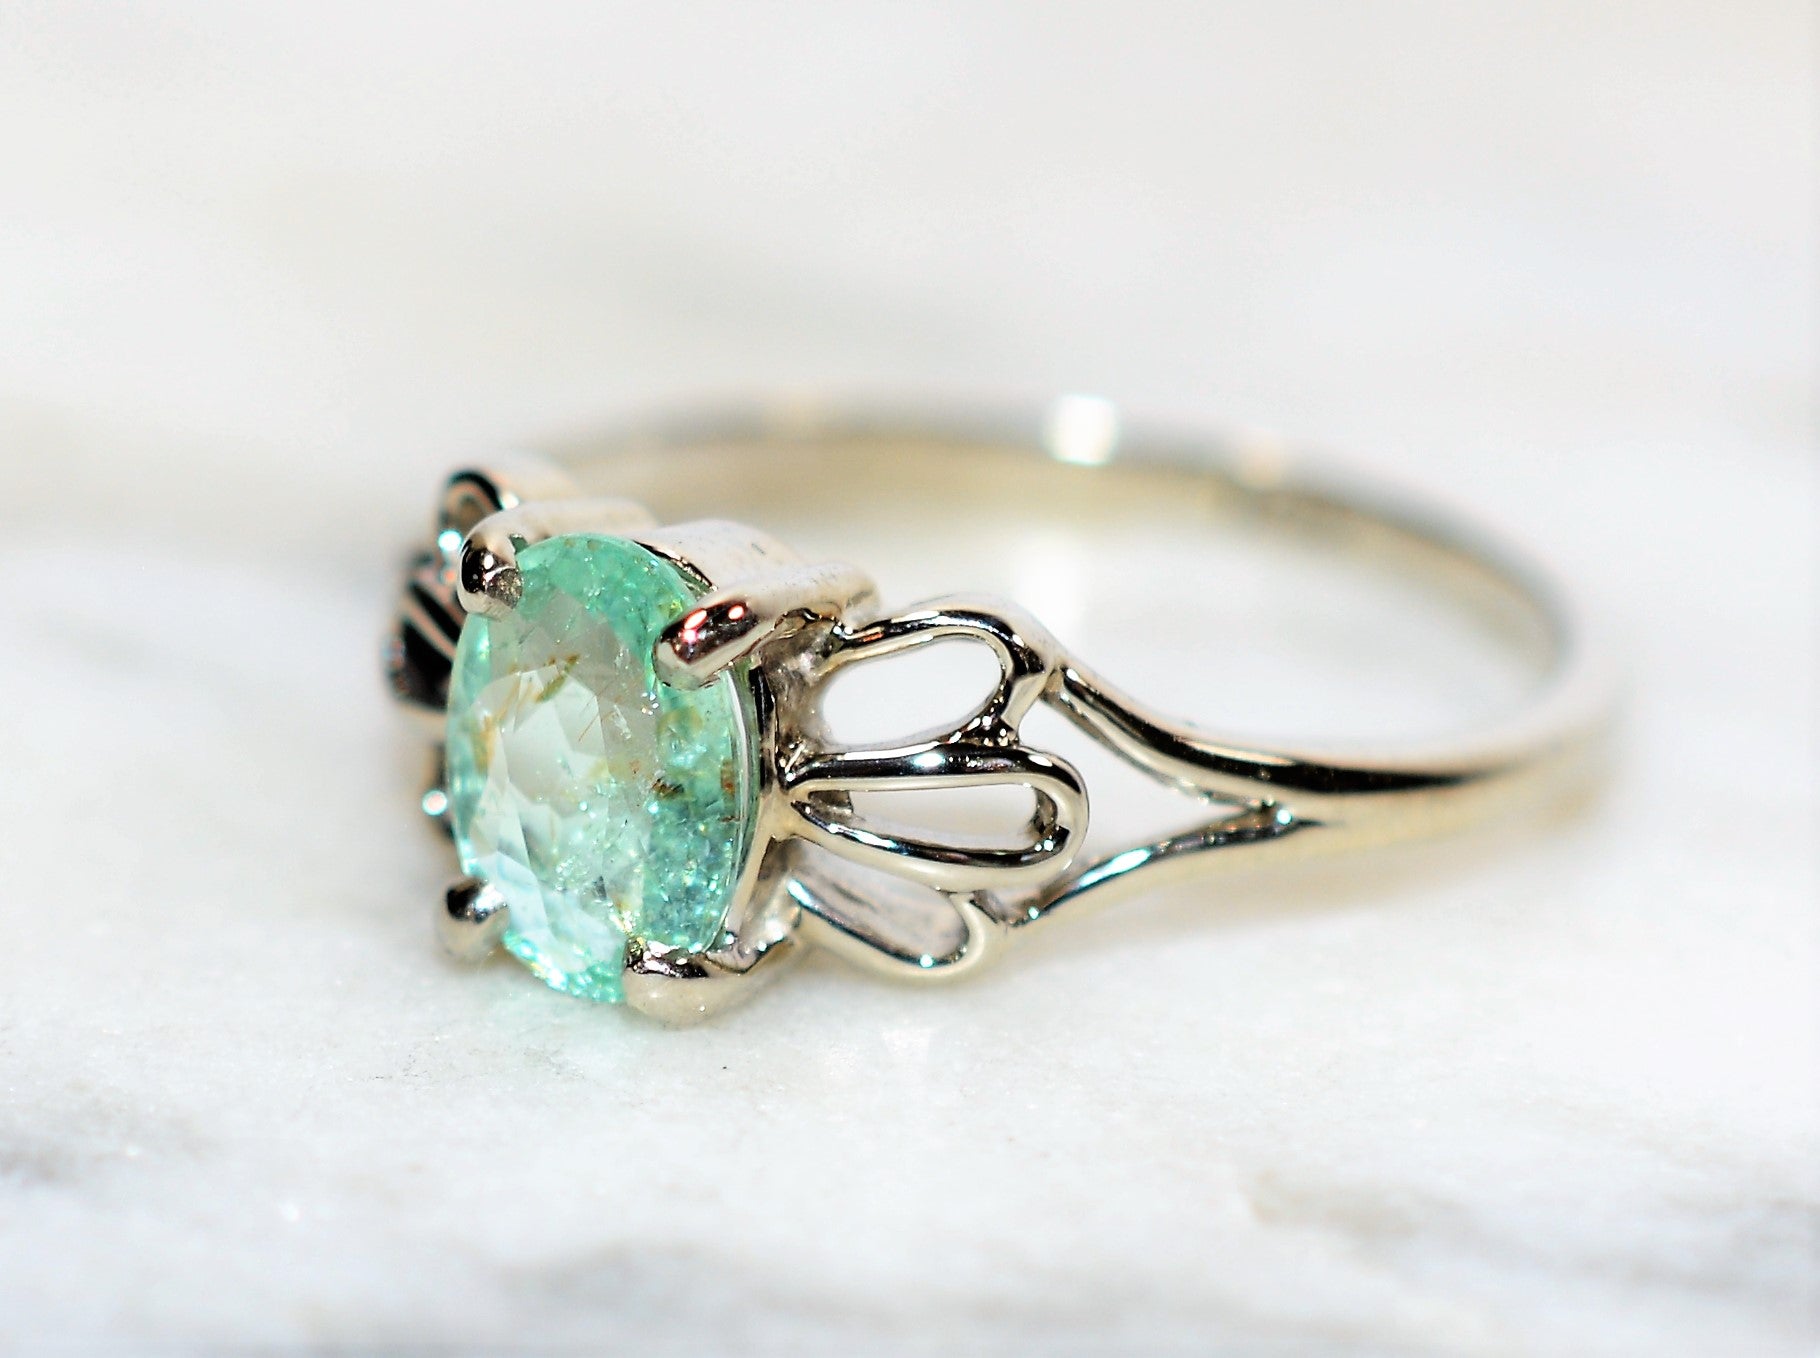 Natural Paraiba Tourmaline Ring 10K Solid White Gold .64ct Solitaire Ring Gemstone Ring Women's Ring Fine Ring Birthstone Ring Jewellery